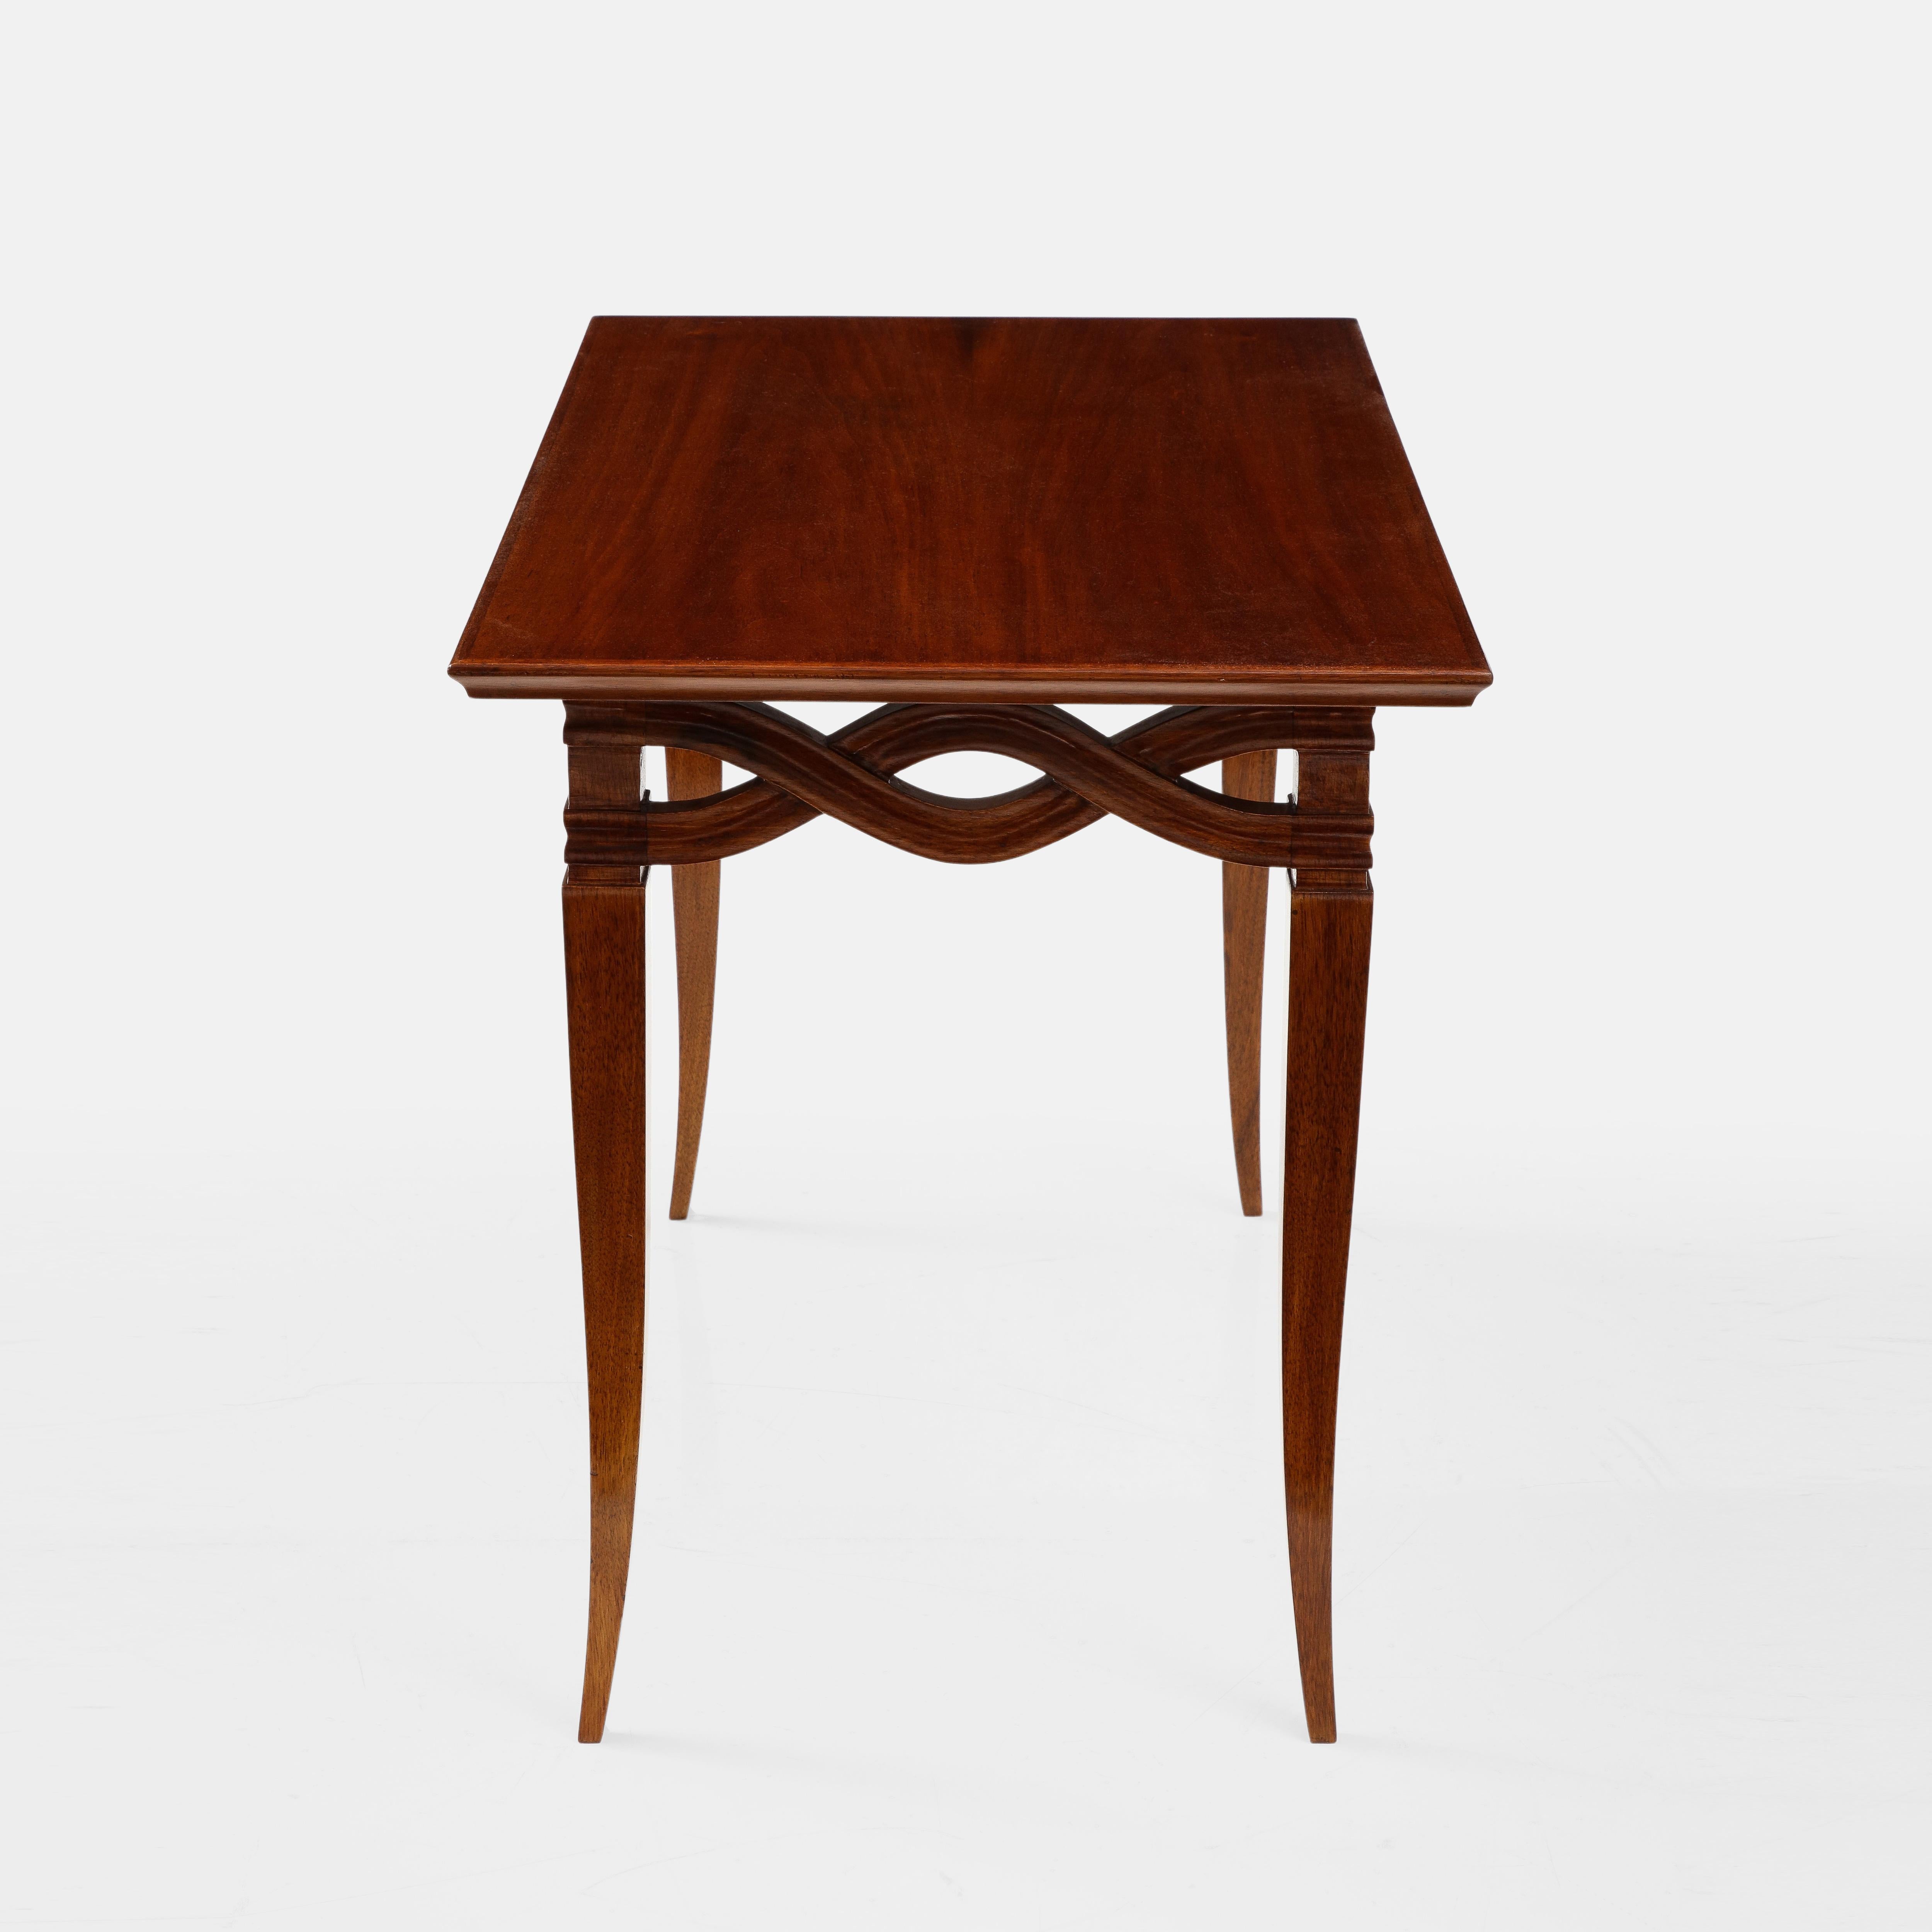 Italian Rare Small Walnut Coffee or Side Table Attributed to Paolo Buffa, Italy, 1940s For Sale